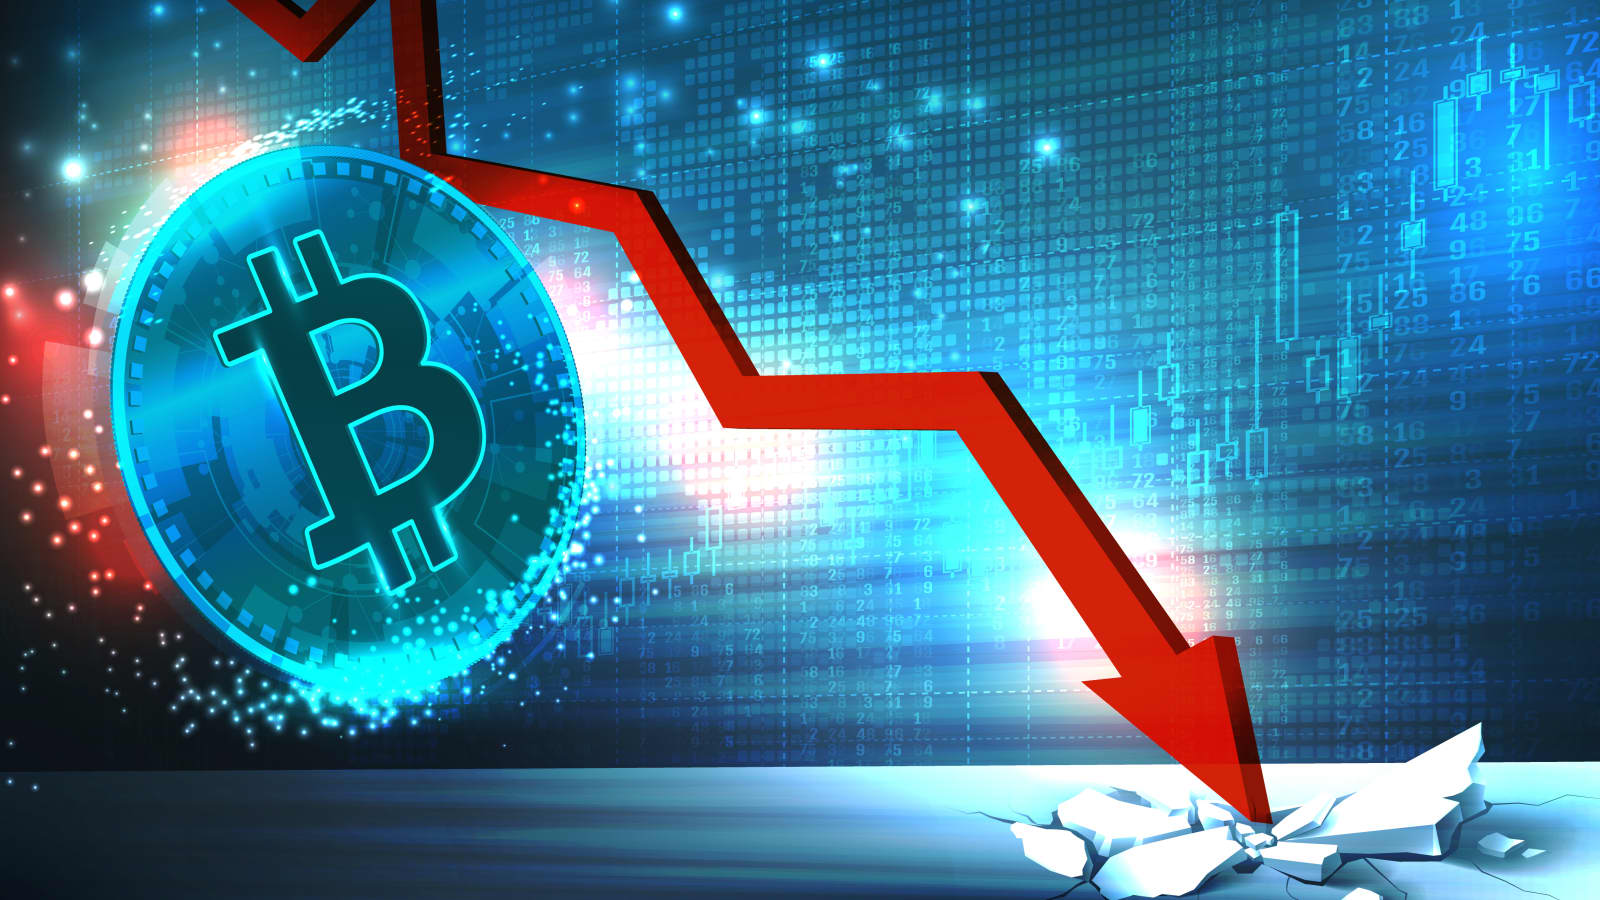 bitcoin lost more than 60% of its value in 2022